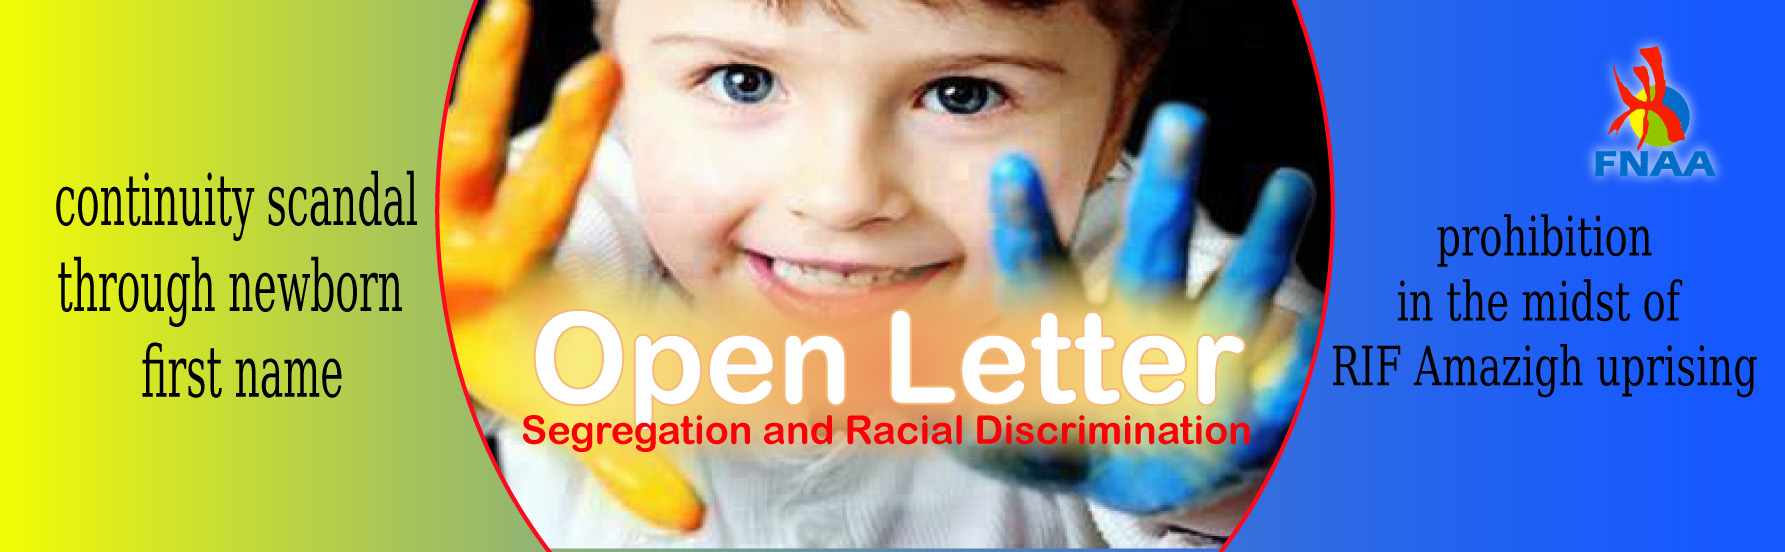 Open Letter : Segregation and Racial Discrimination continuity scandal through newborn first name prohibition in the midst of RIF Amazigh uprising